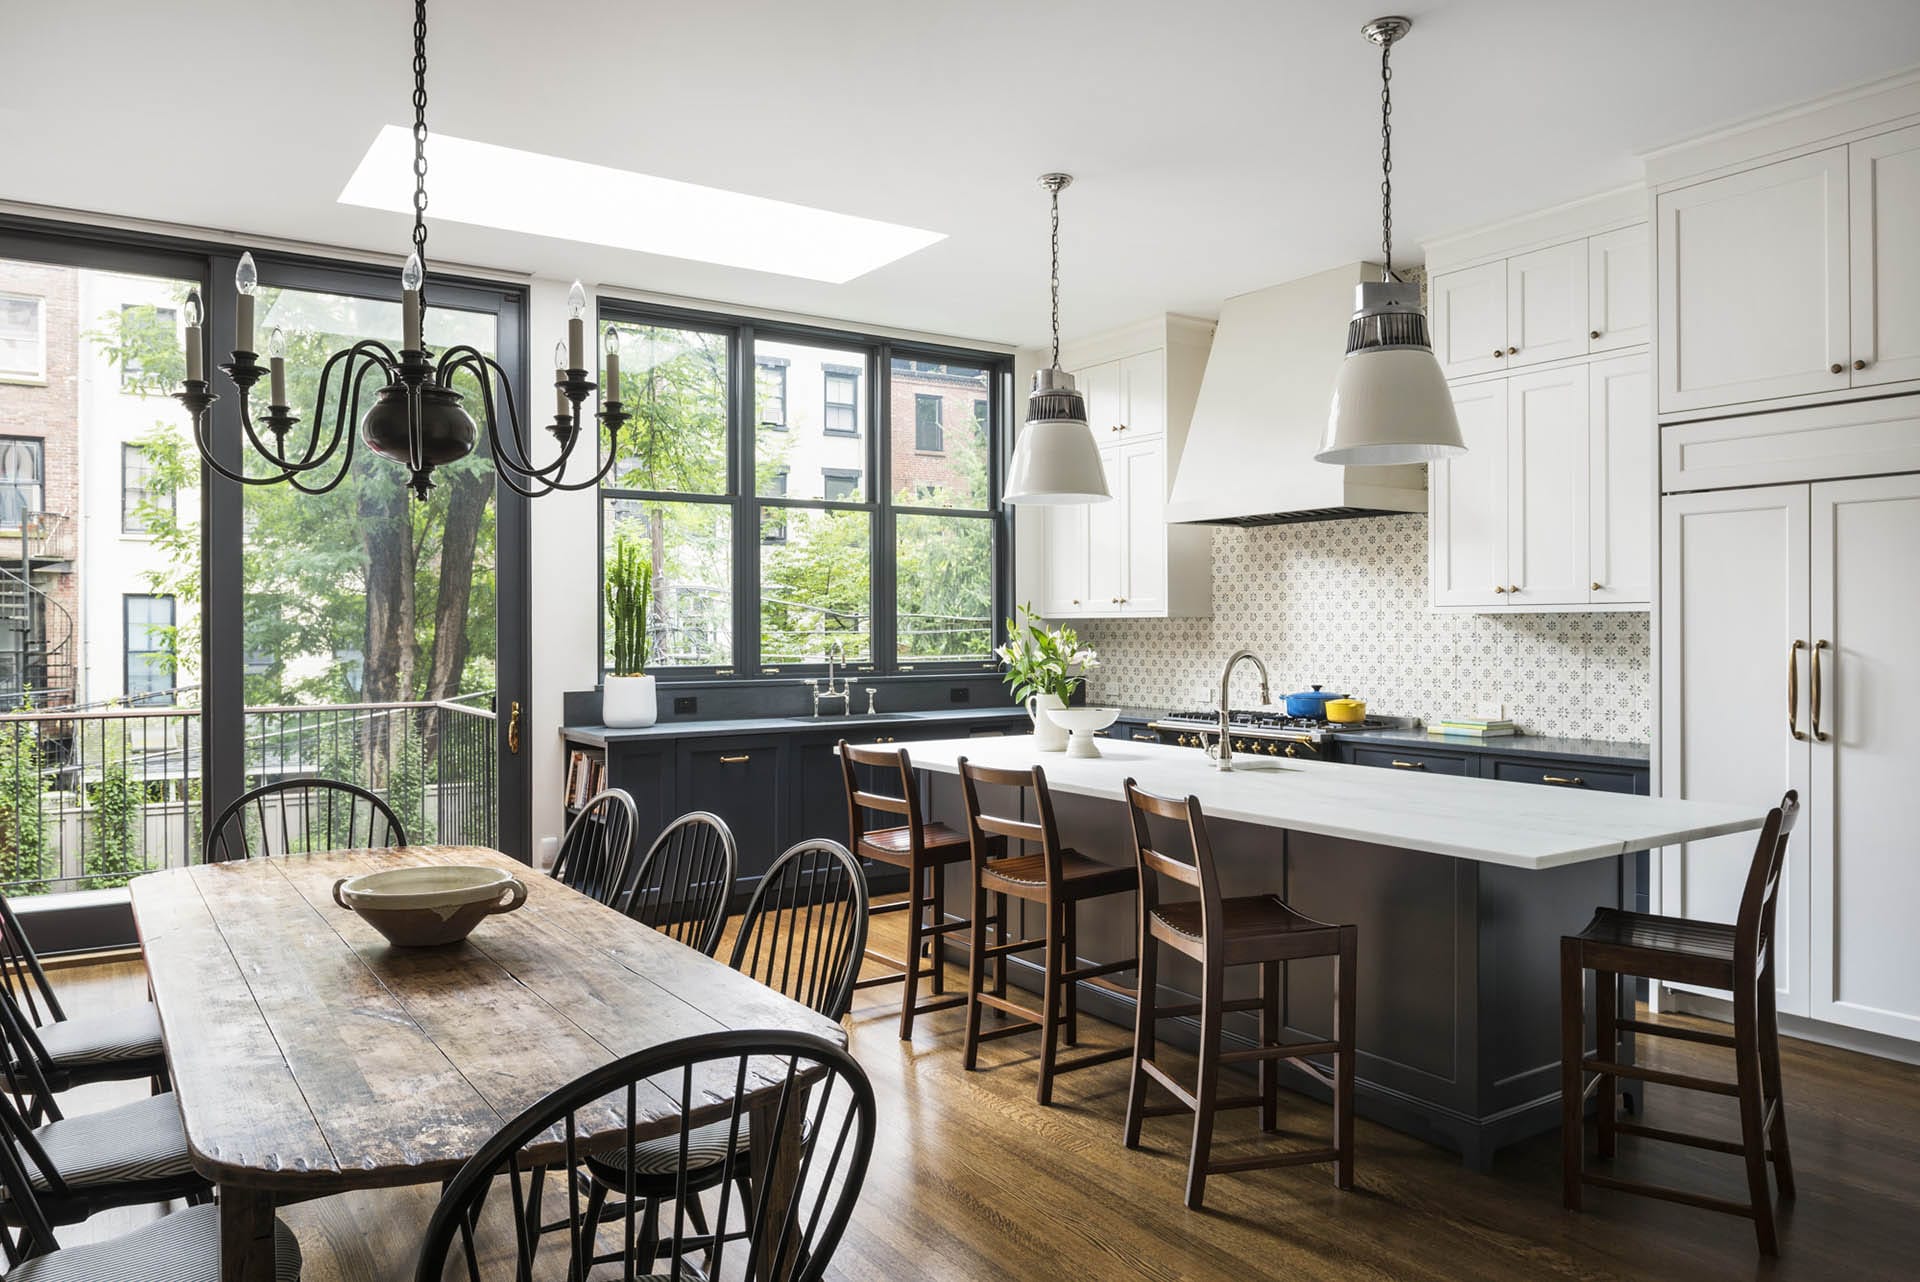 Traditional kitchen and dining area at the rear of a Brooklyn Heights townhouse. A skylight allows light into the rear extension.